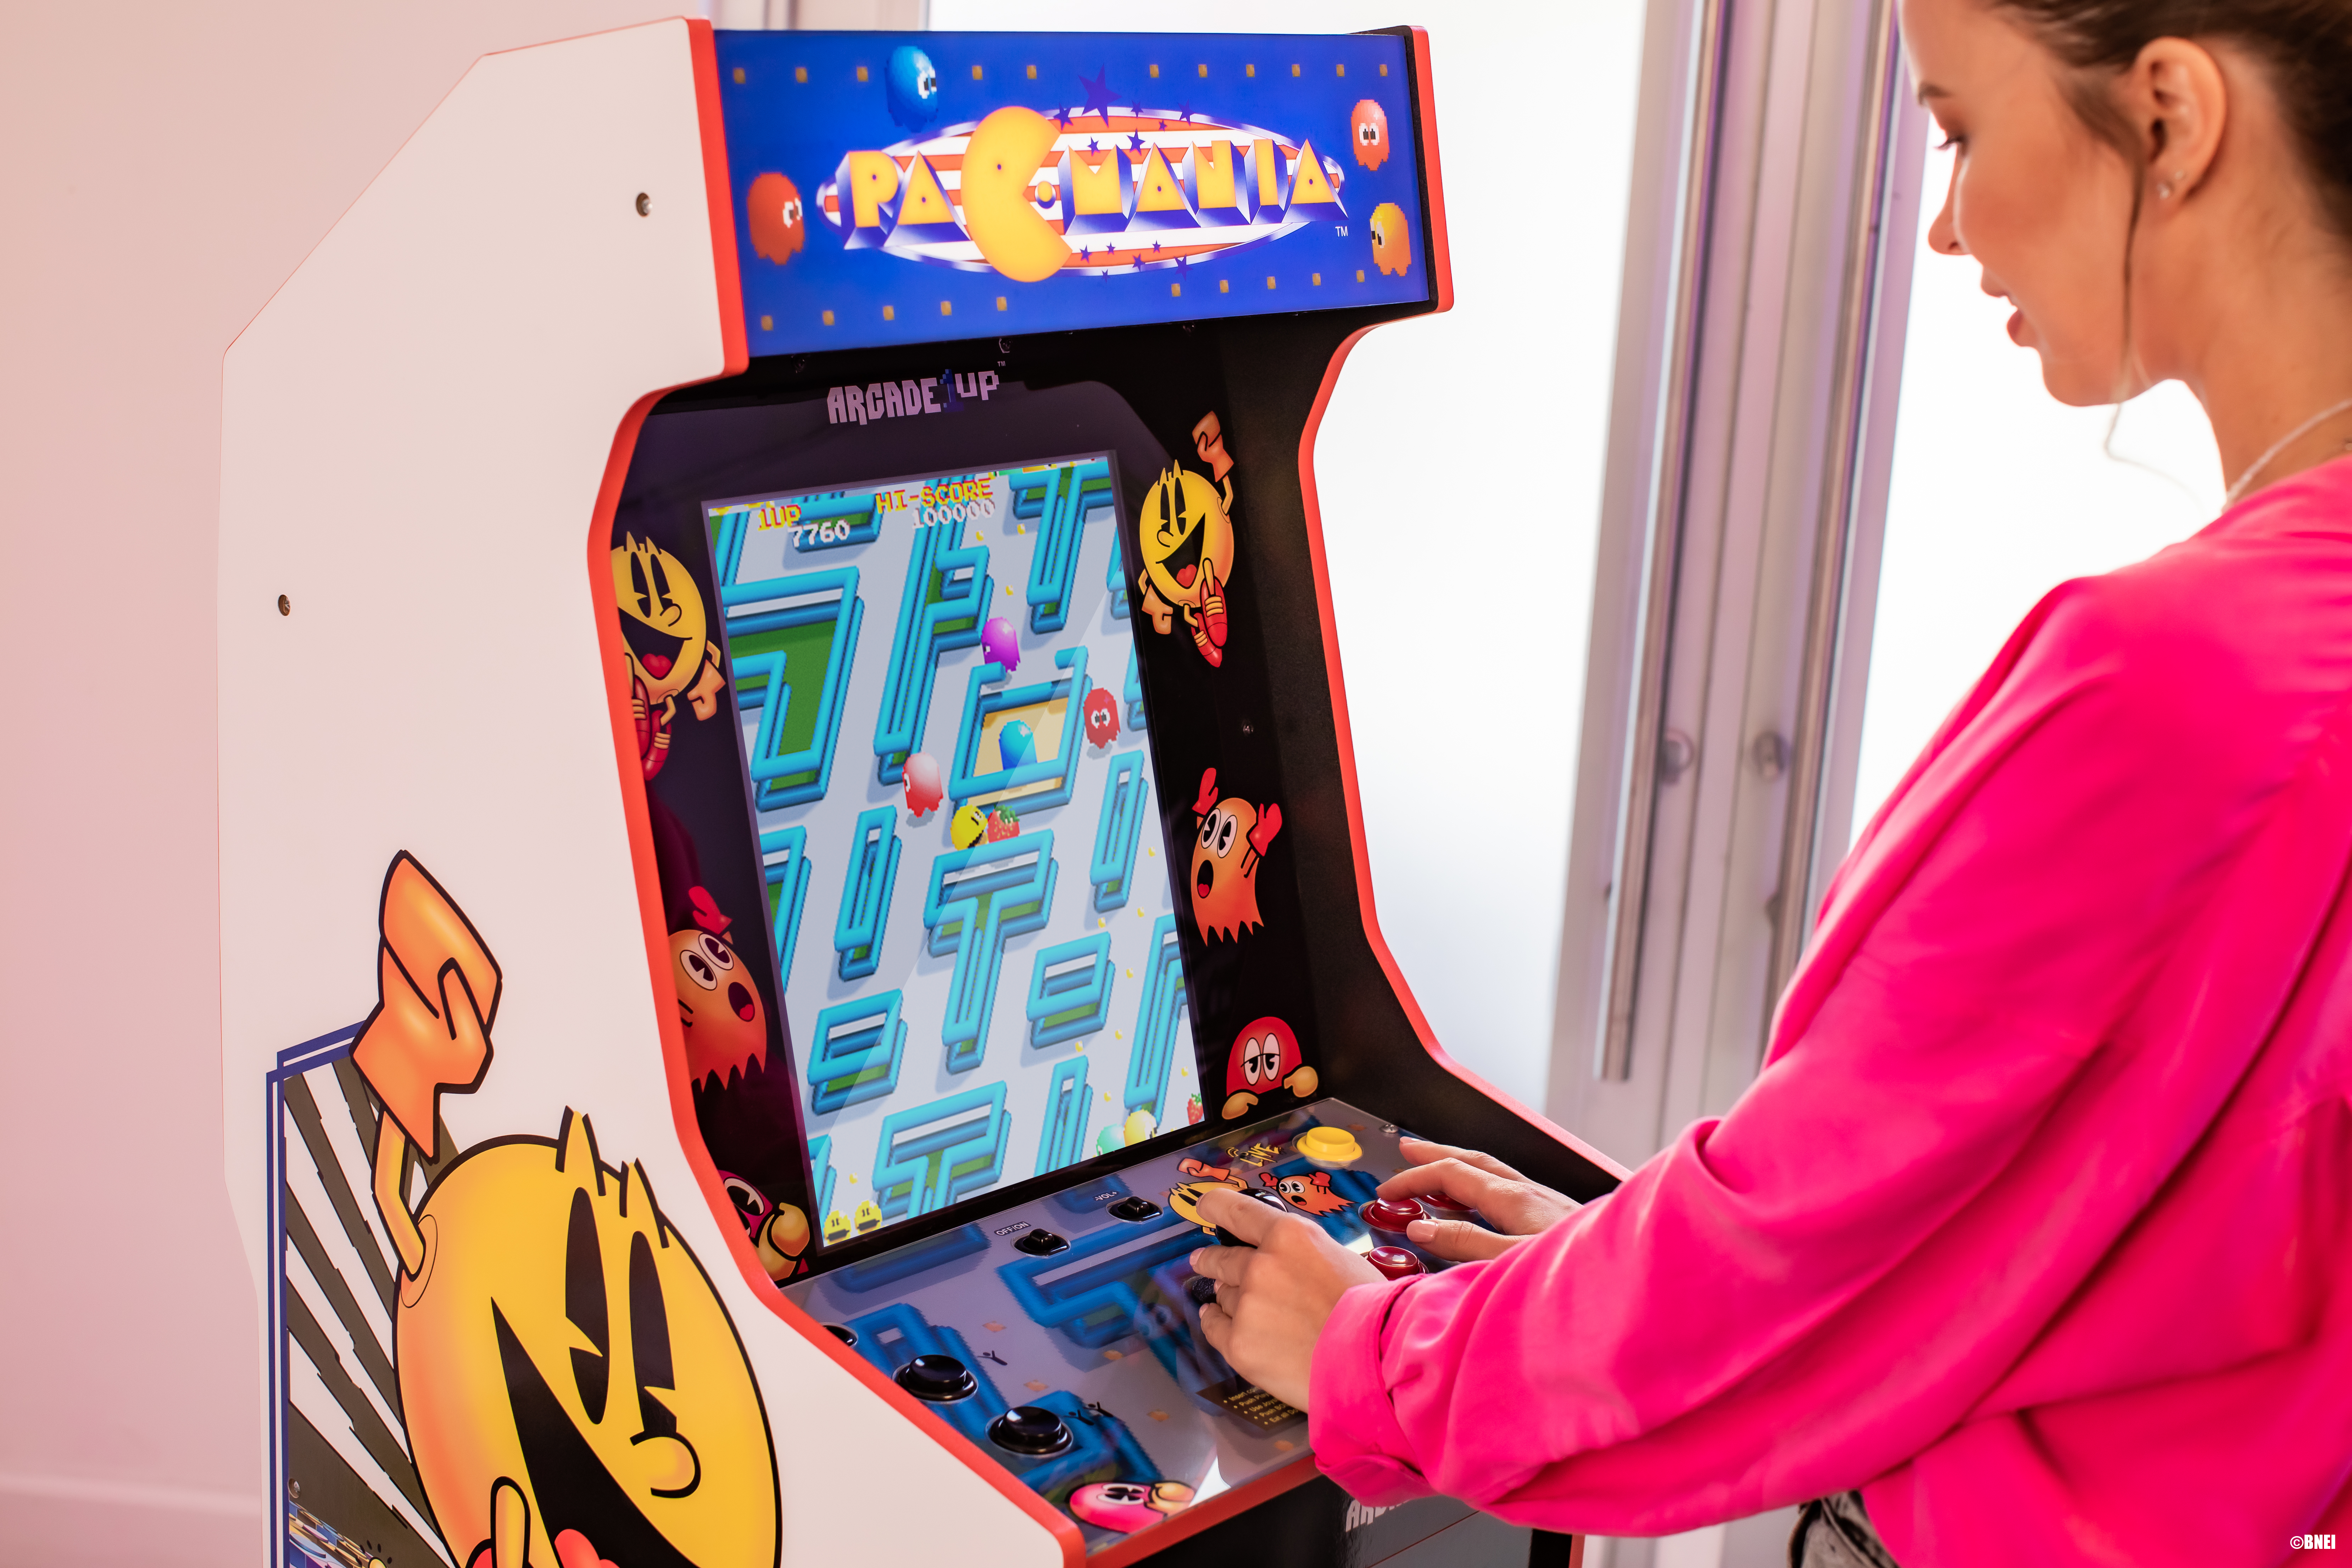 ARCADE 14in1 Wifi 1UP Legacy Pac Mania